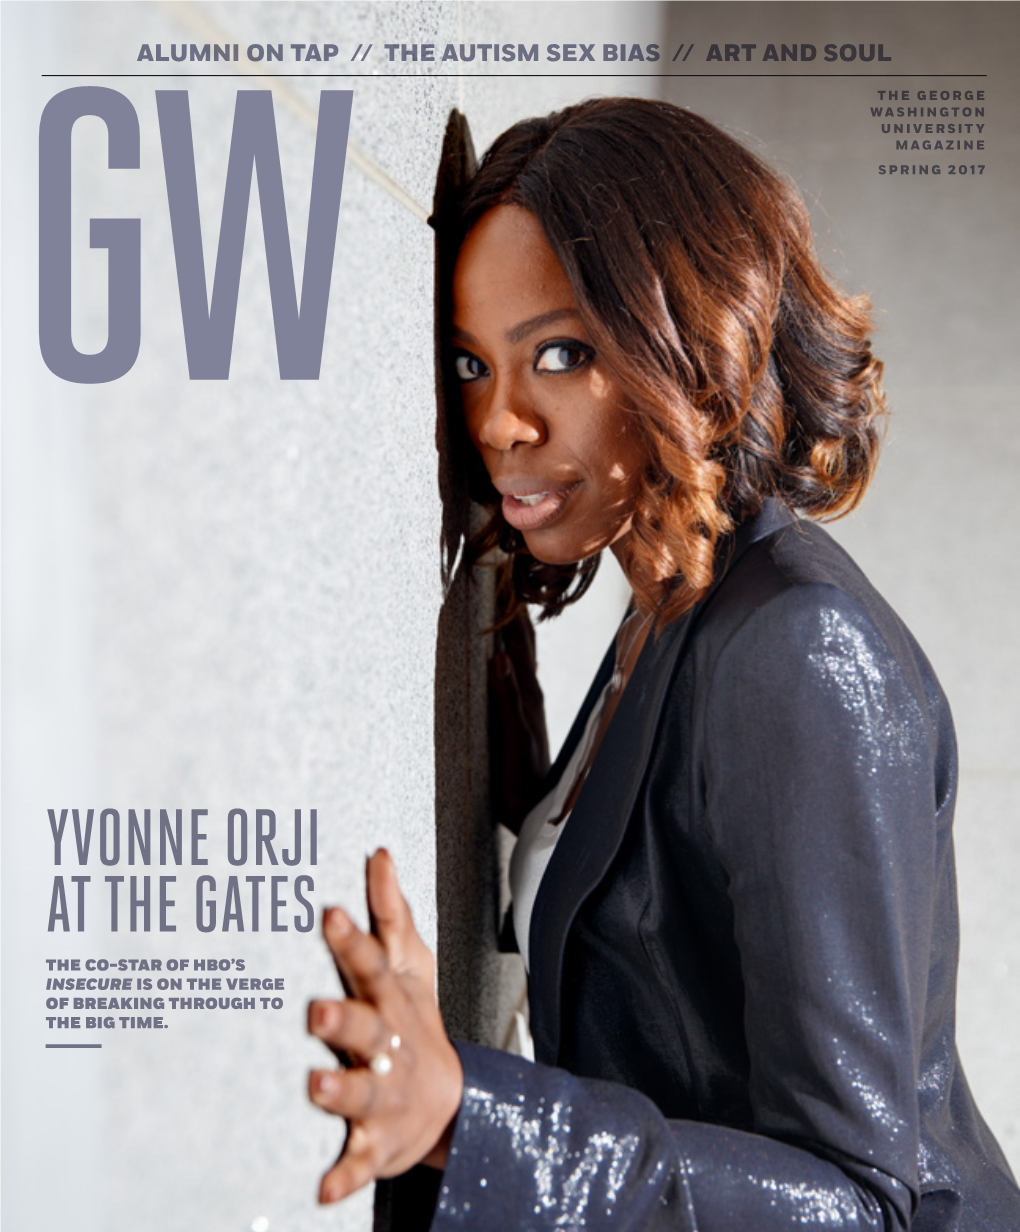 Yvonne Orji at the Gates the Co-Star of Hbo’S Insecure Is on the Verge of Breaking Through to the Big Time